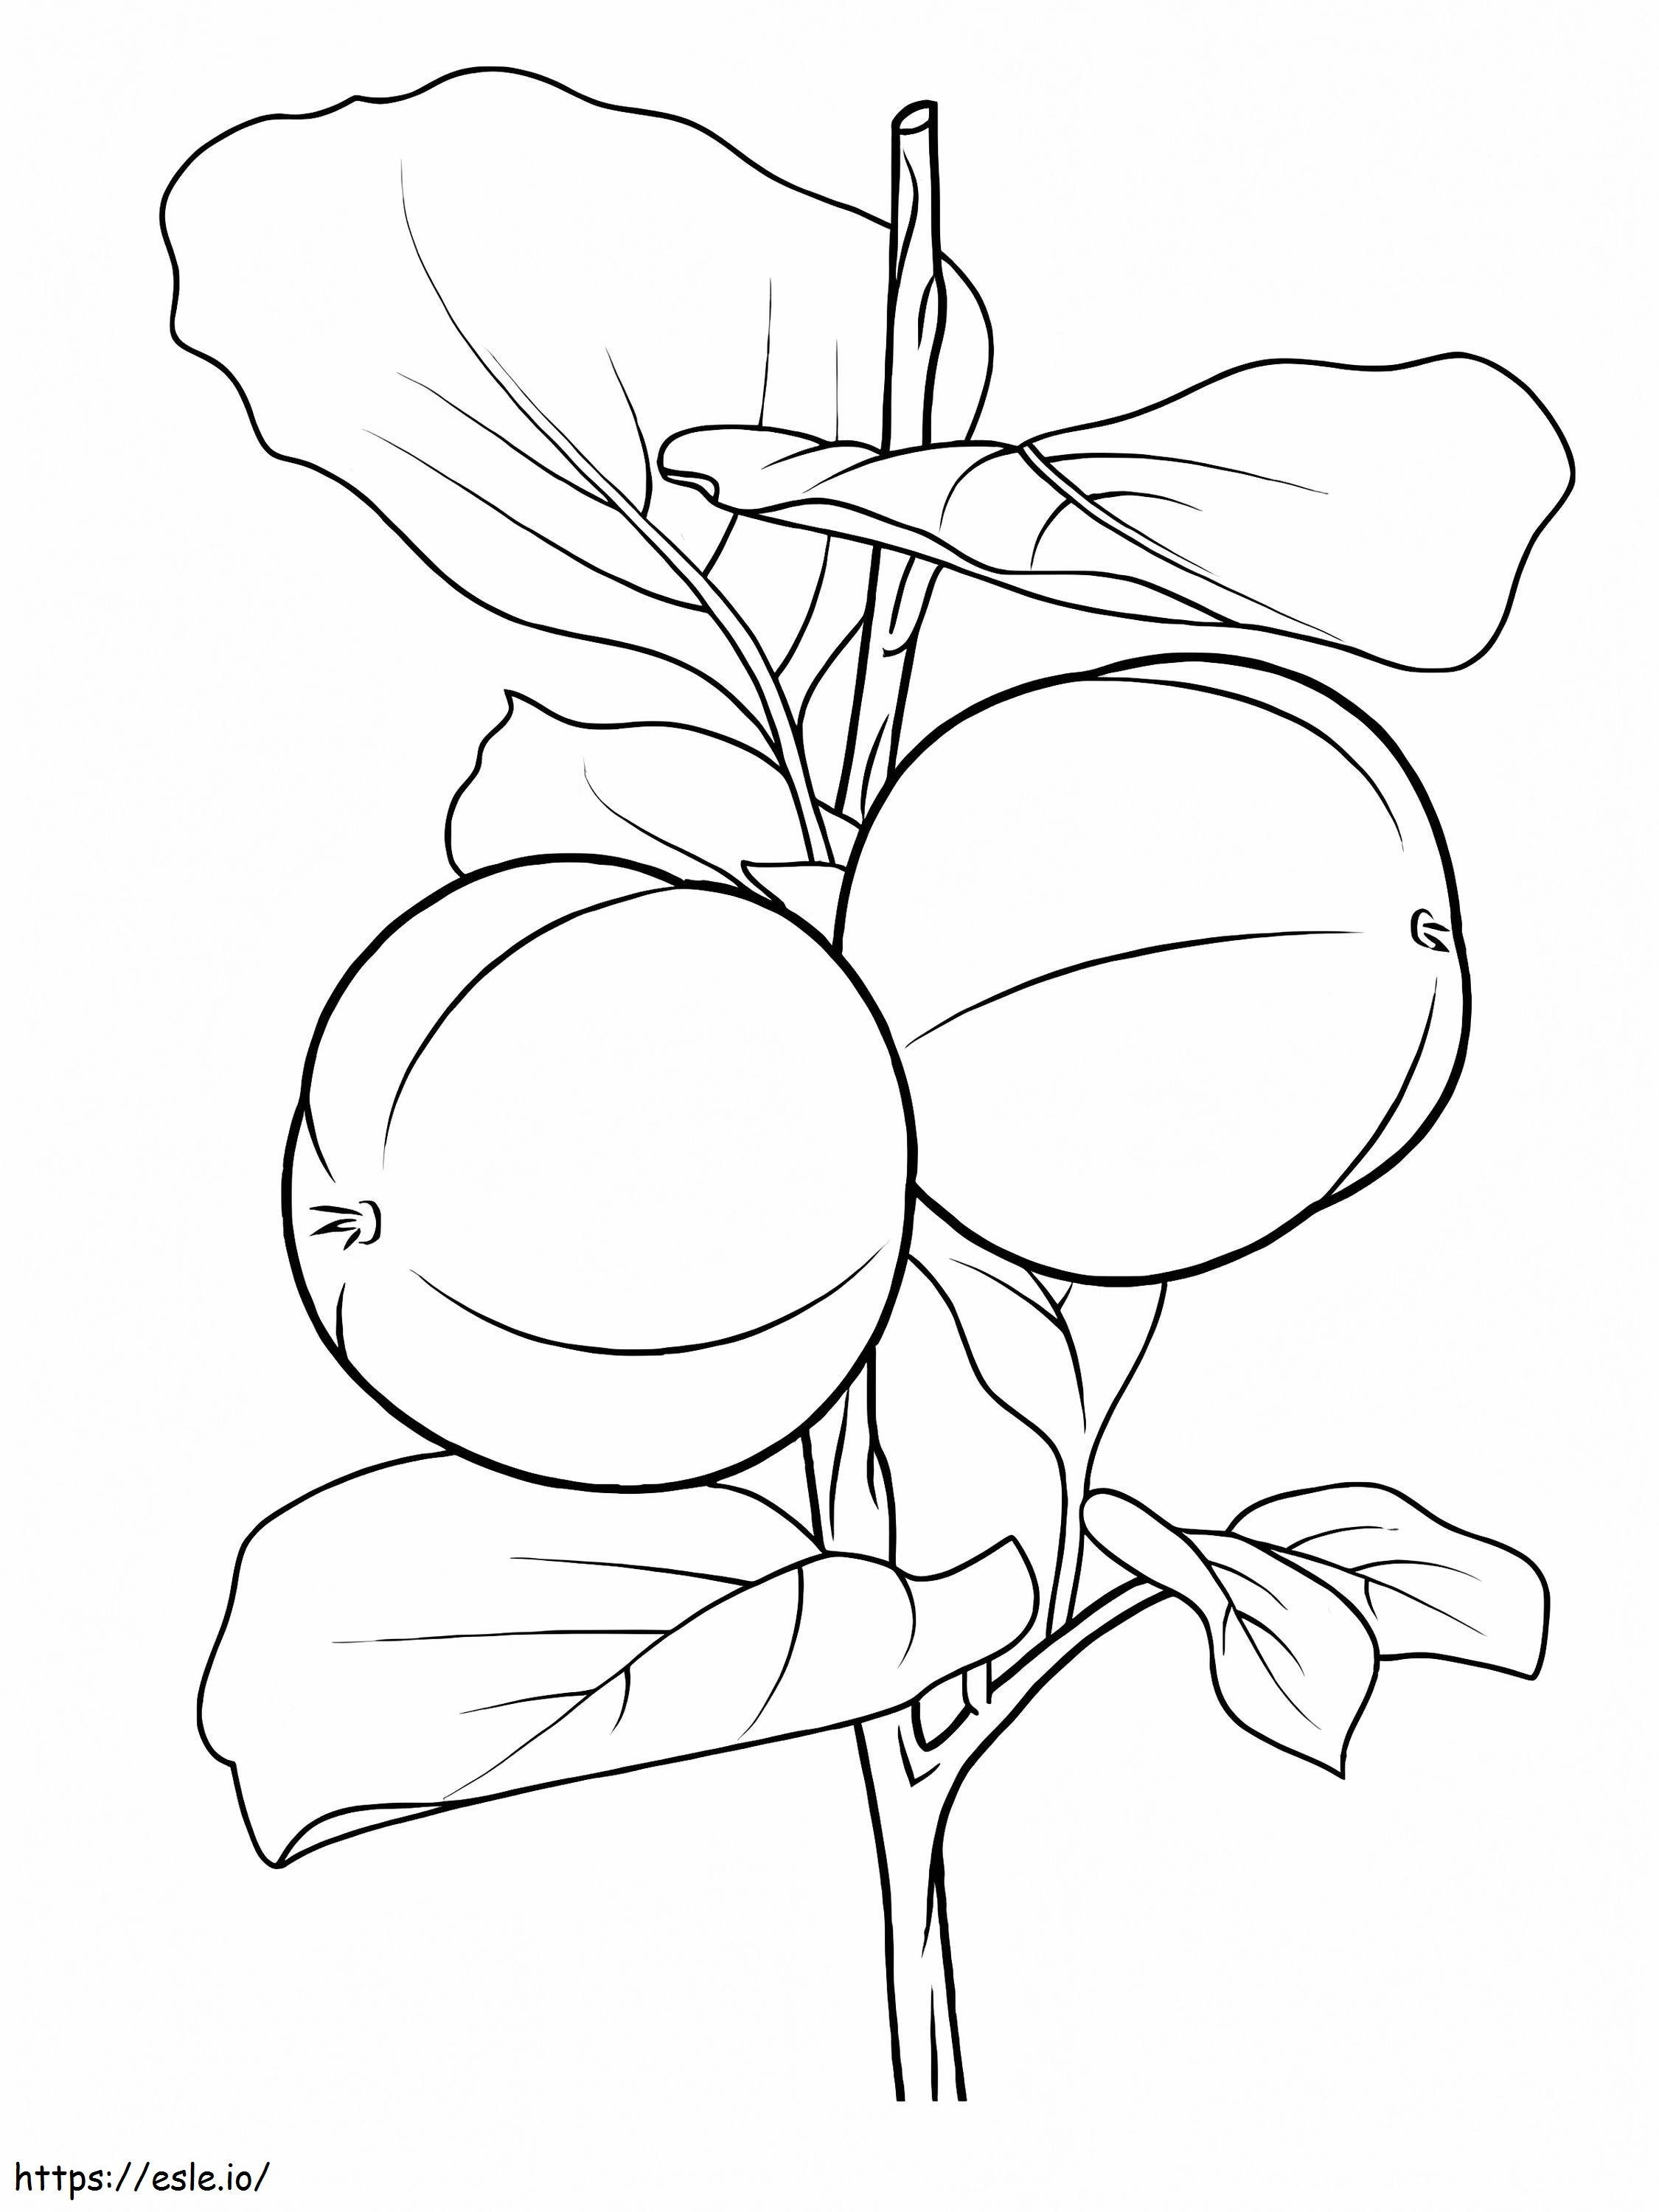 Two Apricots On A Tree Branch coloring page